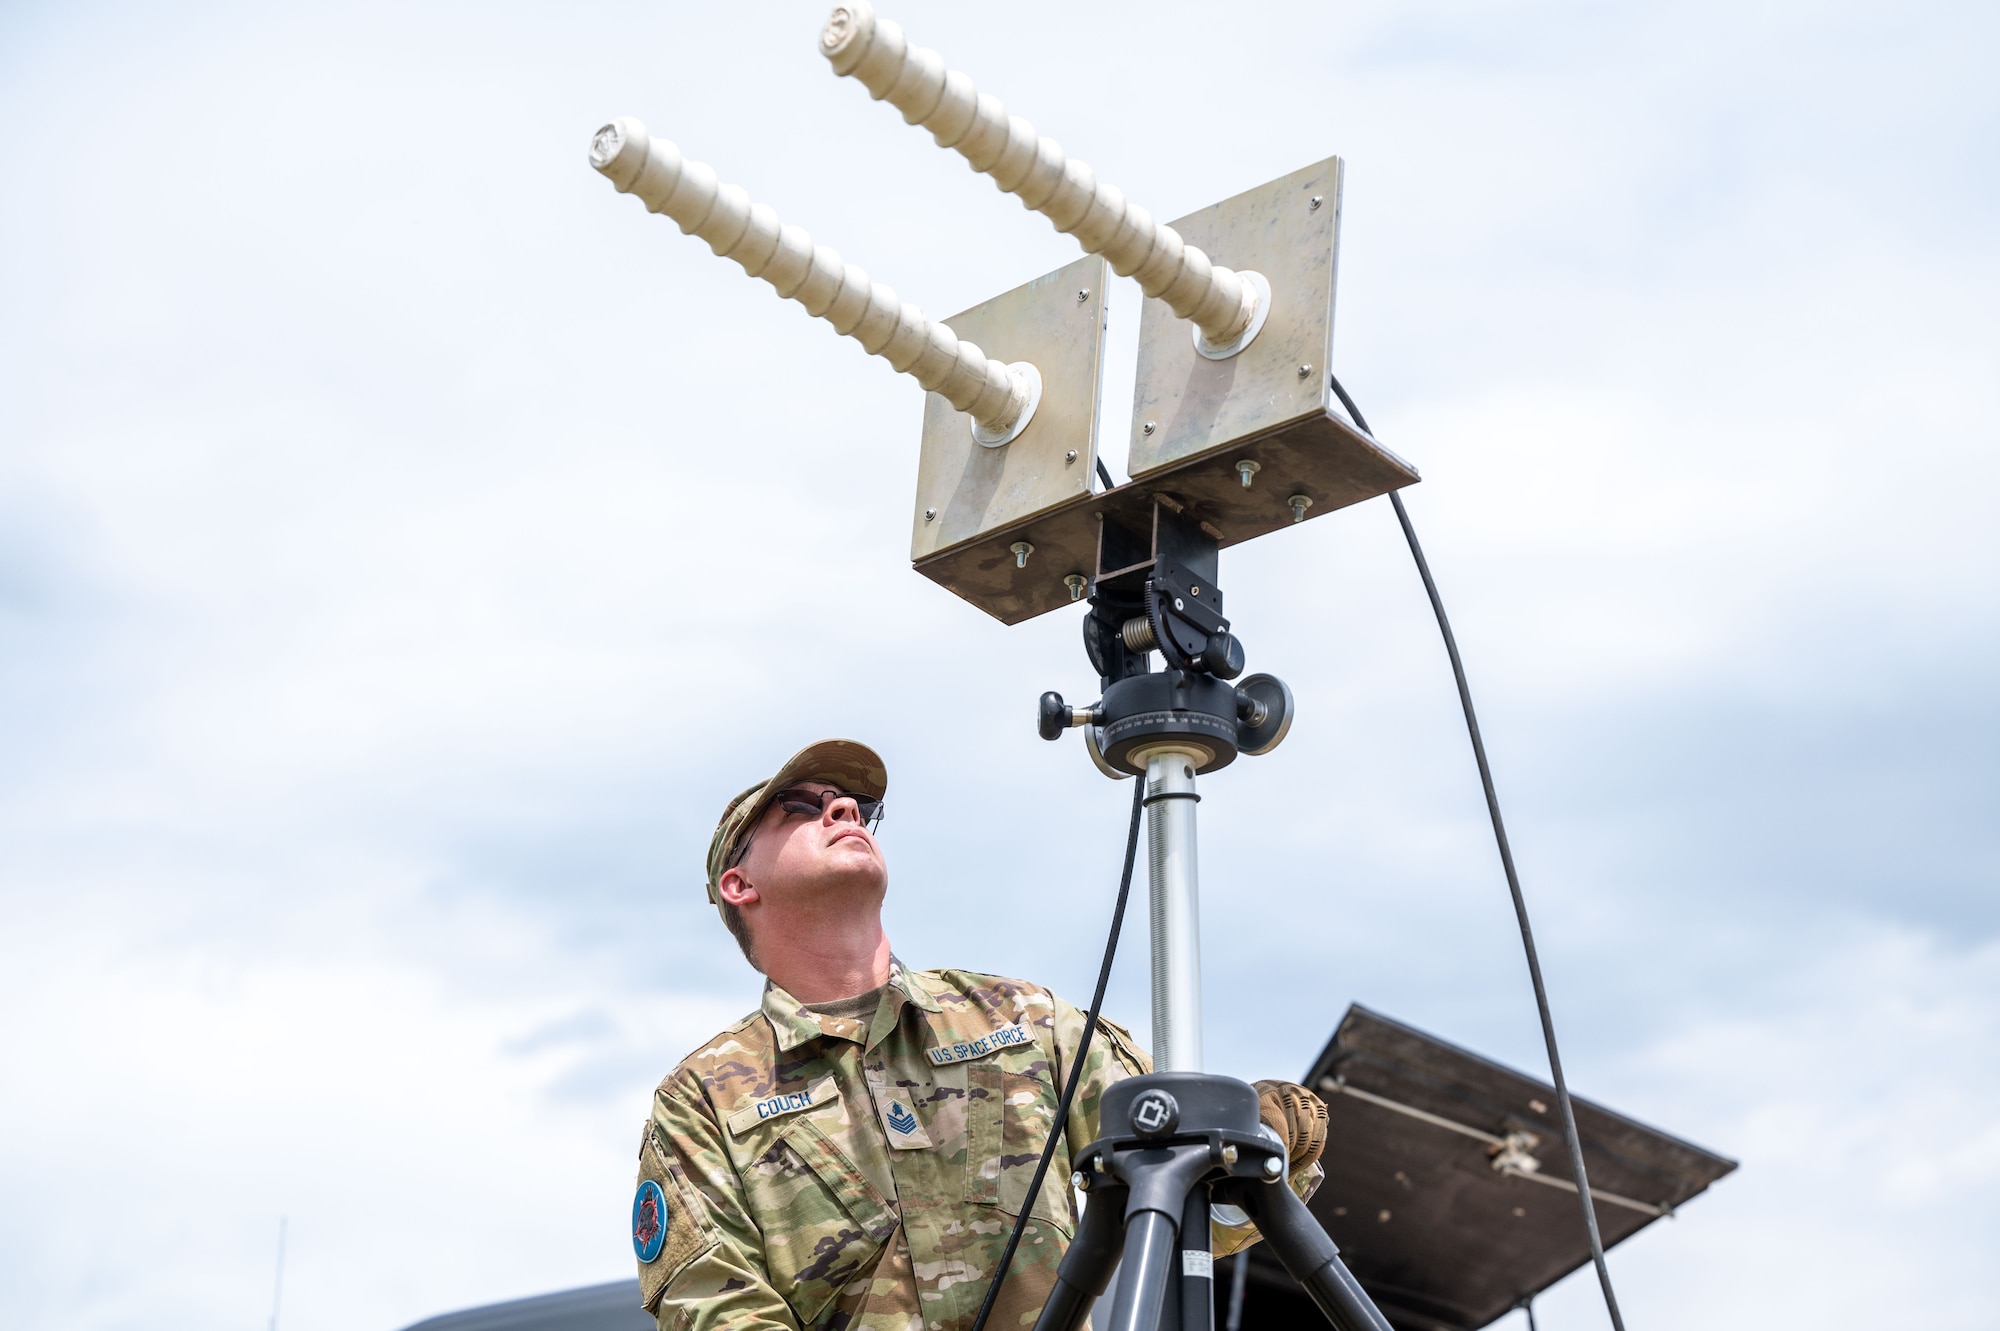 U.S. Space Force Tech. Sgt. Vince Couch, 527th Space Aggressor Squadron (SAS), conducts Global Positioning System (GPS) electromagnetic interference training with a GPS electromagnetic attack system at Schriever Space Force Base, Colorado, July 18, 2023. The 527th SAS’s mission is to know, teach, and replicate modern, emerging, and integrated space threats in order to prepare service, joint, and coalition forces to fight in and through a Contested, Degraded, and Operationally-limited (CDO) environment. (U.S. Space Force photo by Ethan Johnson)